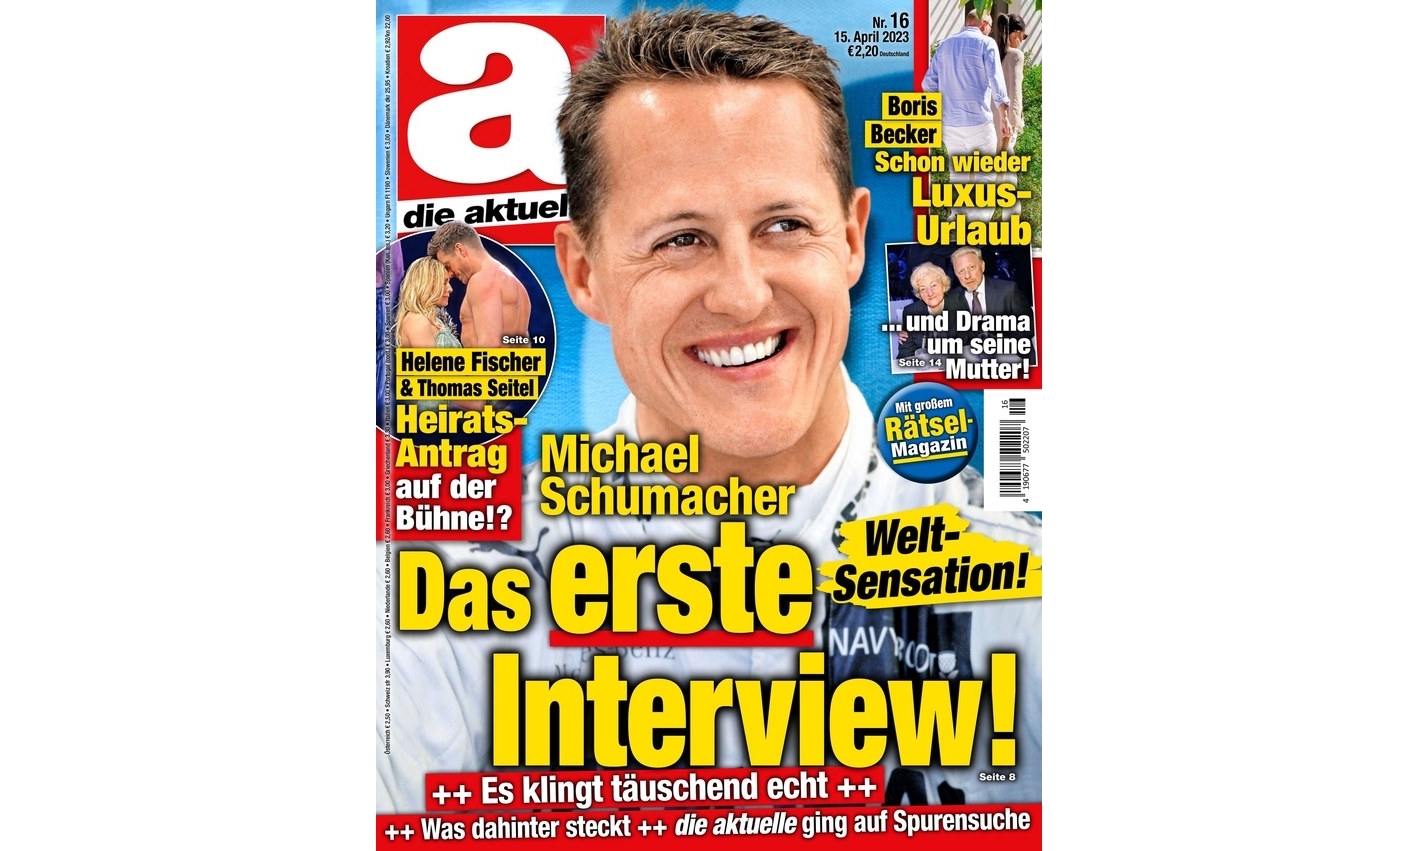 Michael Schumacher’s family plans to sue German tabloid for AI-generated ‘interview’ | DeviceDaily.com